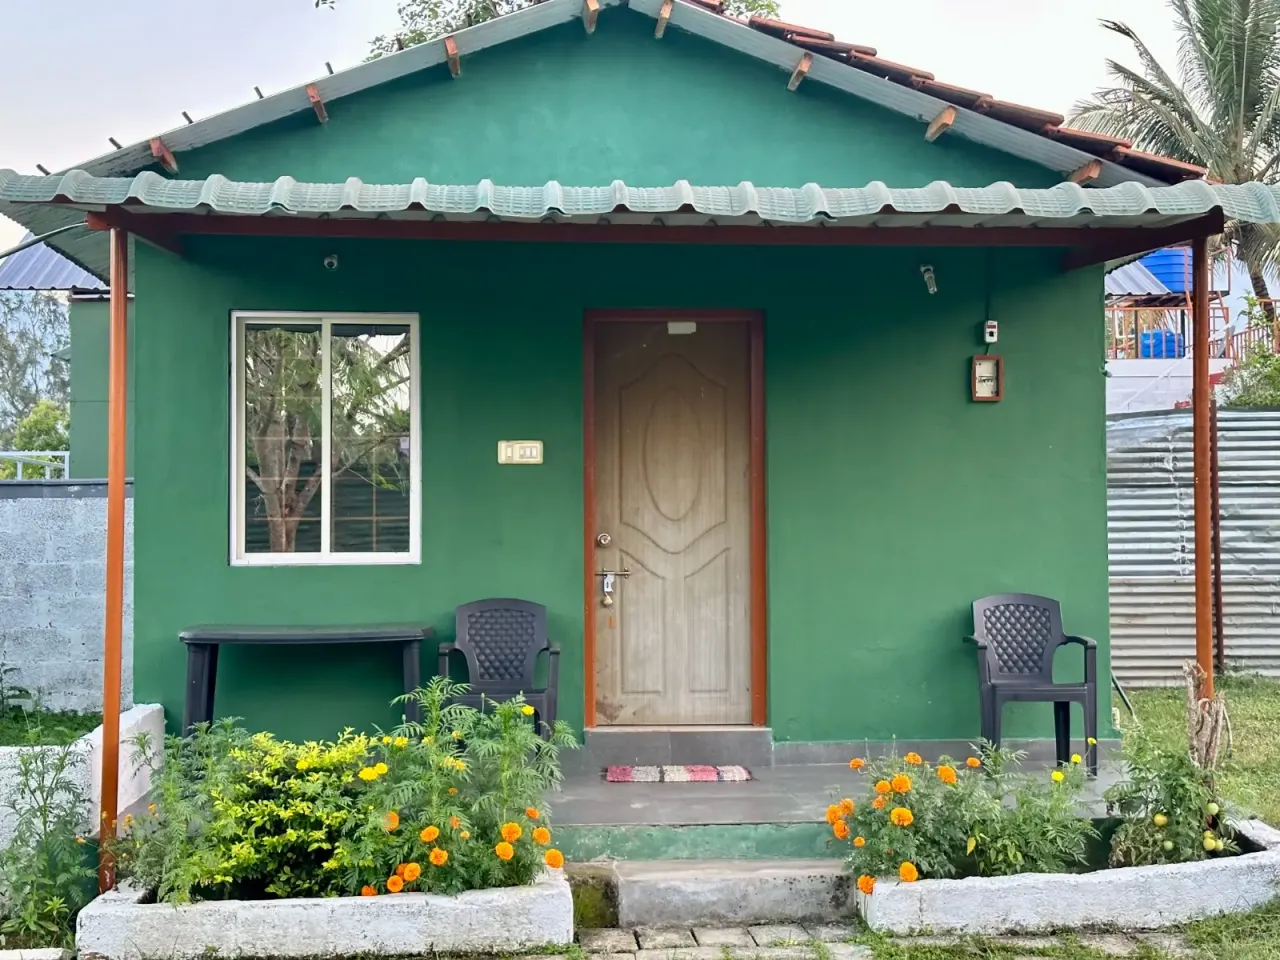 Deluxe Cottages by "Down to Earth" by Laksem Situated in sethumadai, pollachi, coimbatore. It is good for families and couples